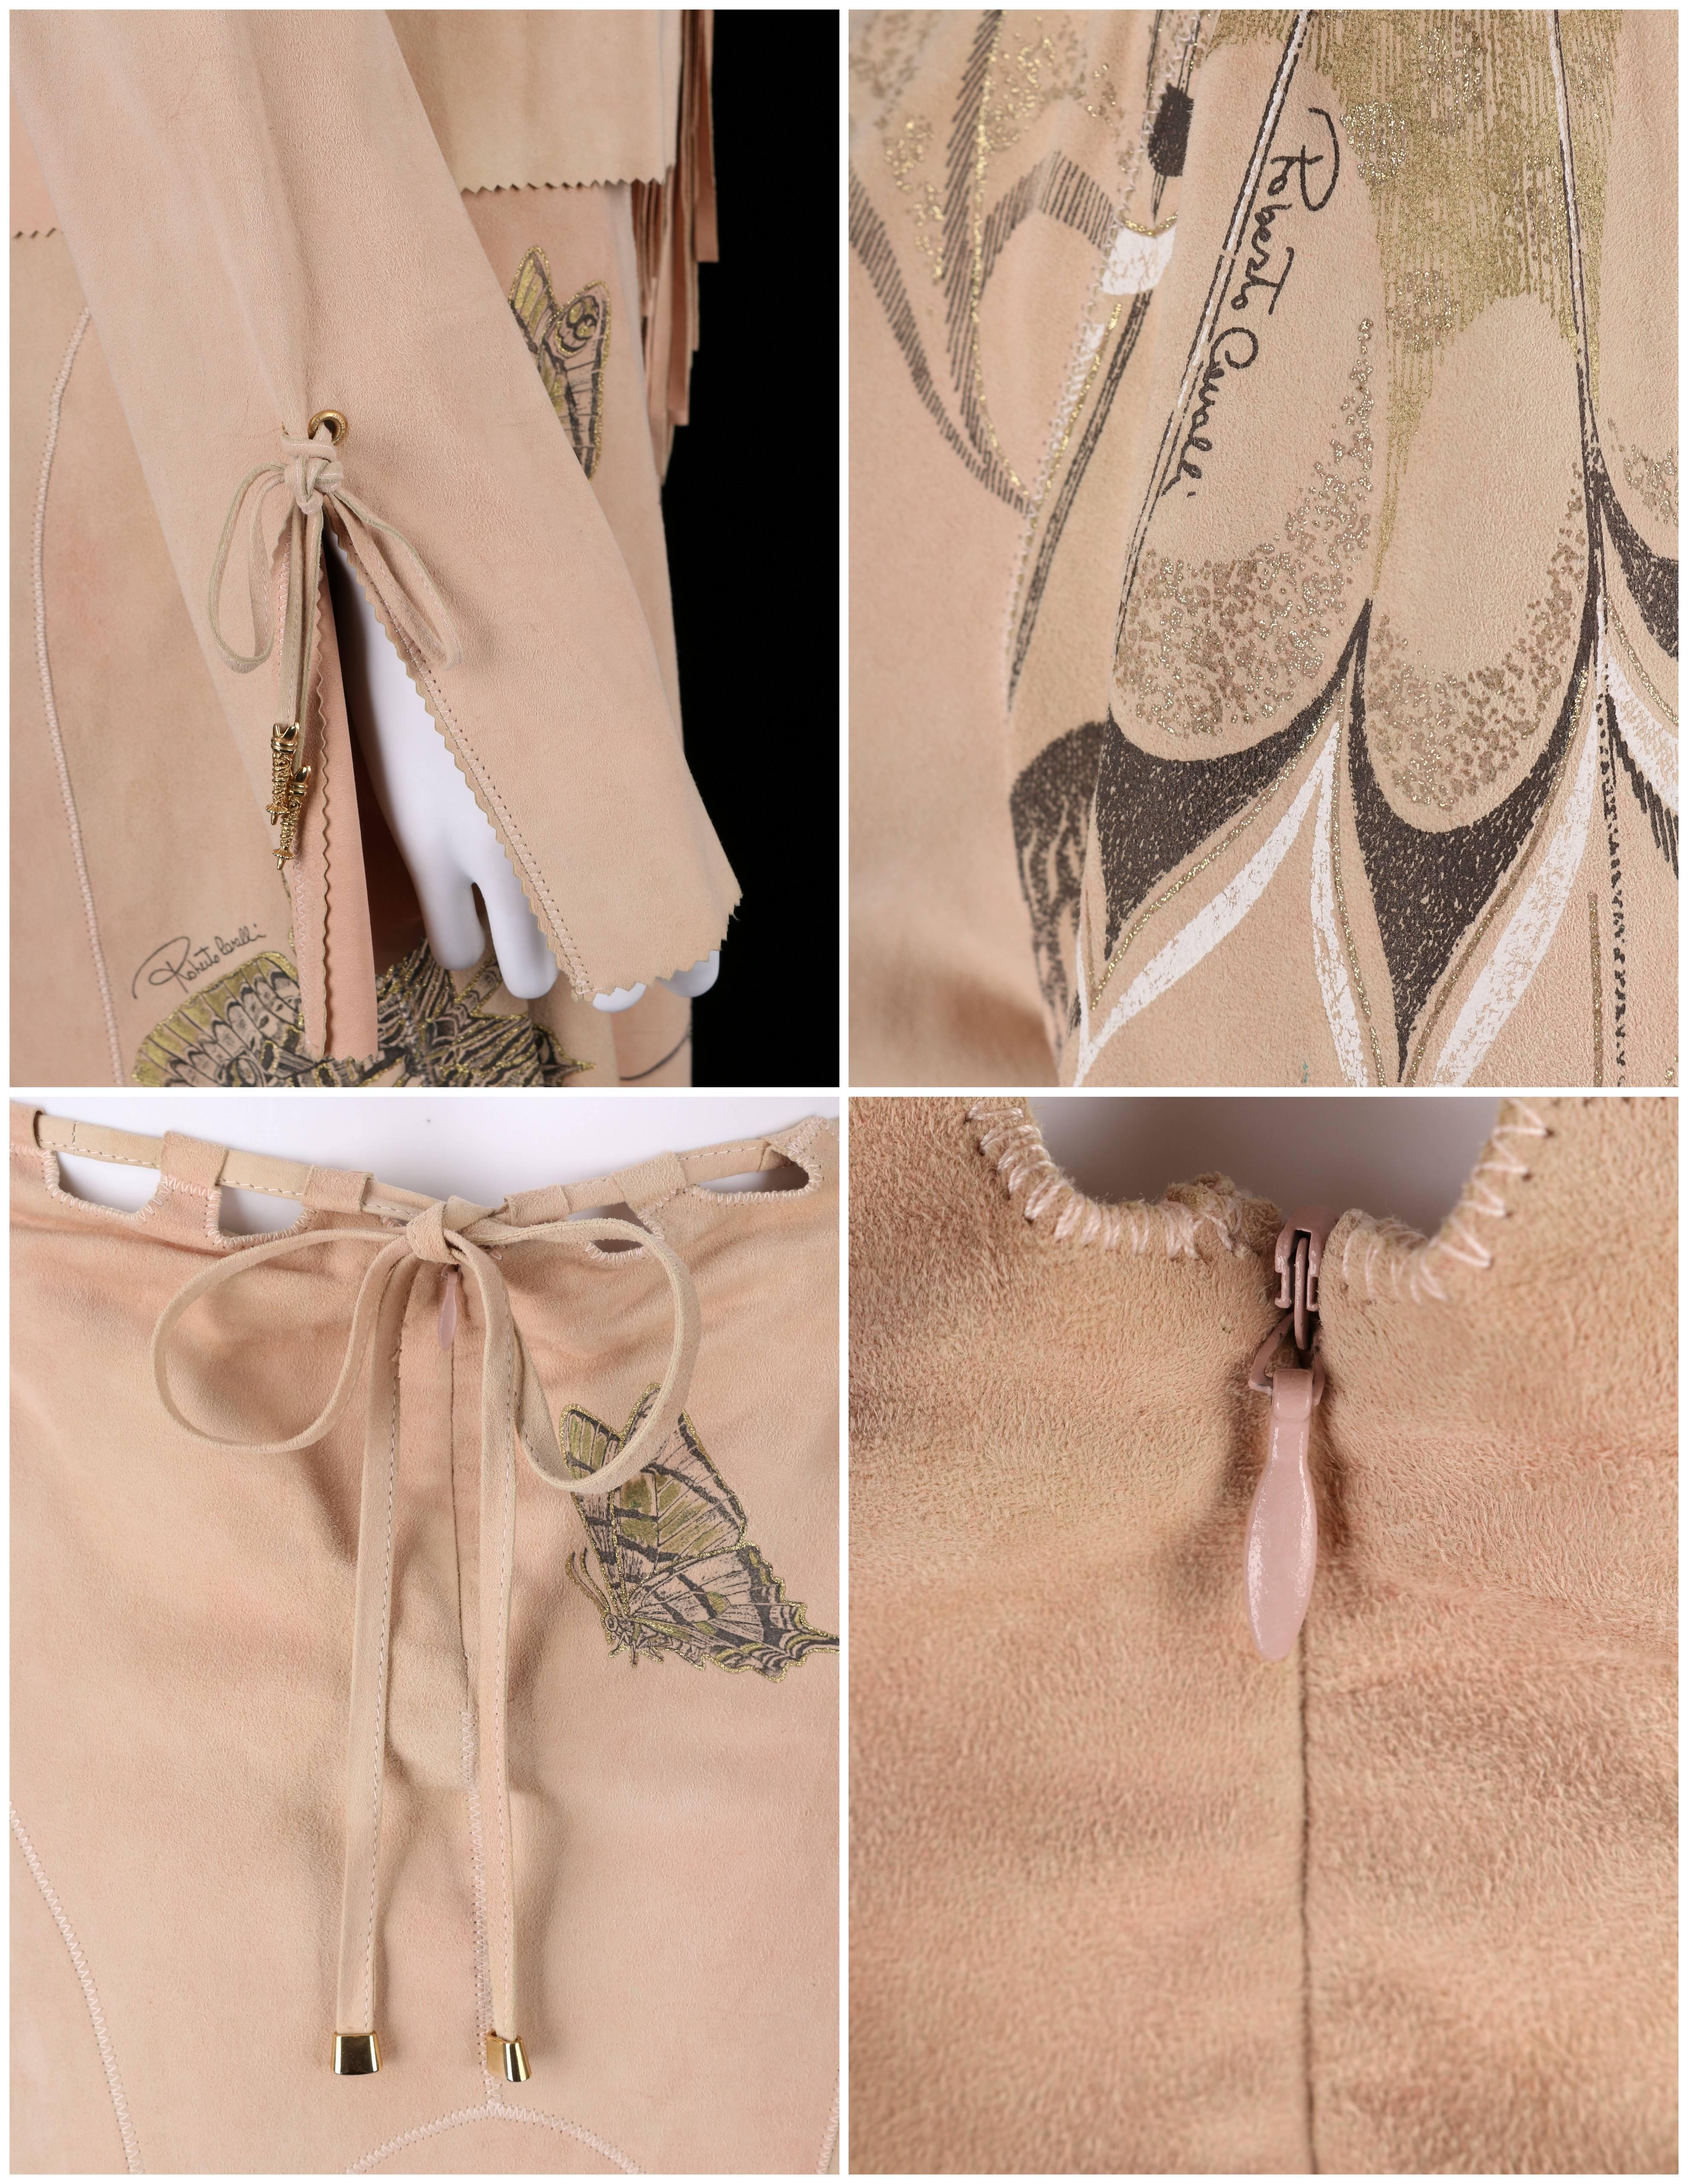 ROBERTO CAVALLI 2 Pc Tan Beige Suede Leather Butterfly Fringe Jacket Skirt XS S 4